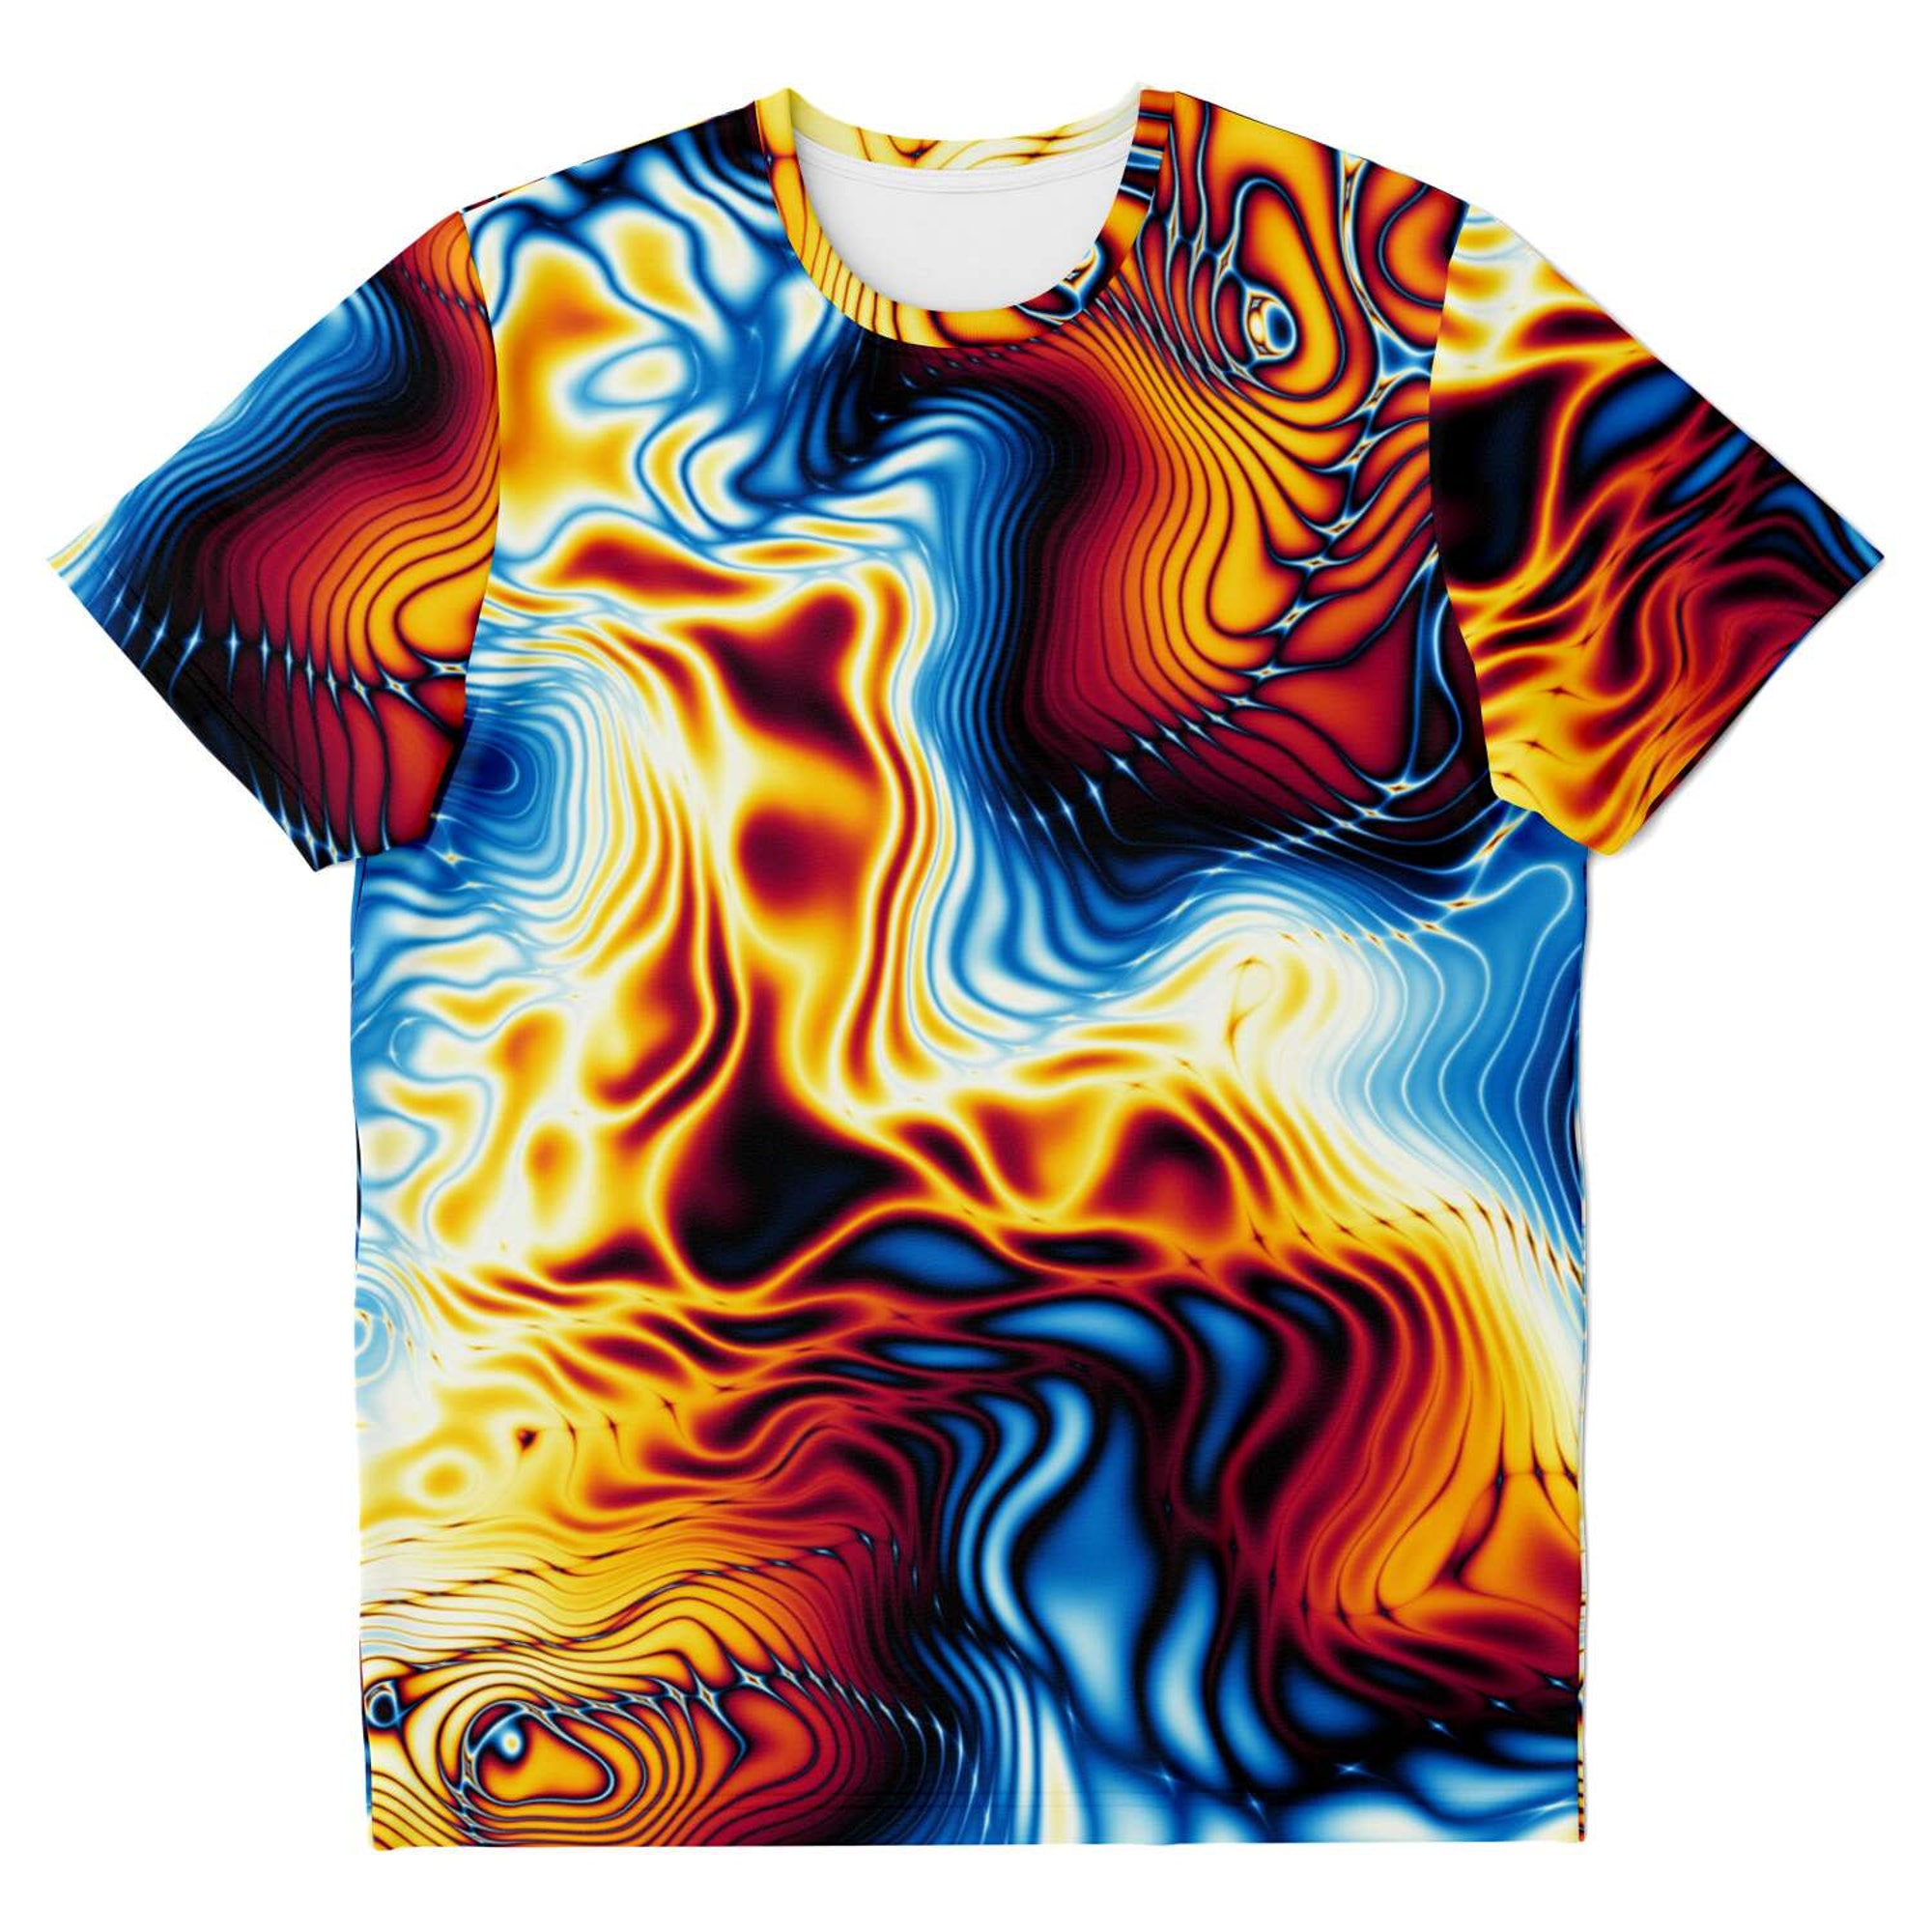 Discover Abstract Psychedelic Art Liquid Fractals Waves Swirls Paint Lsd 3D T Shirt